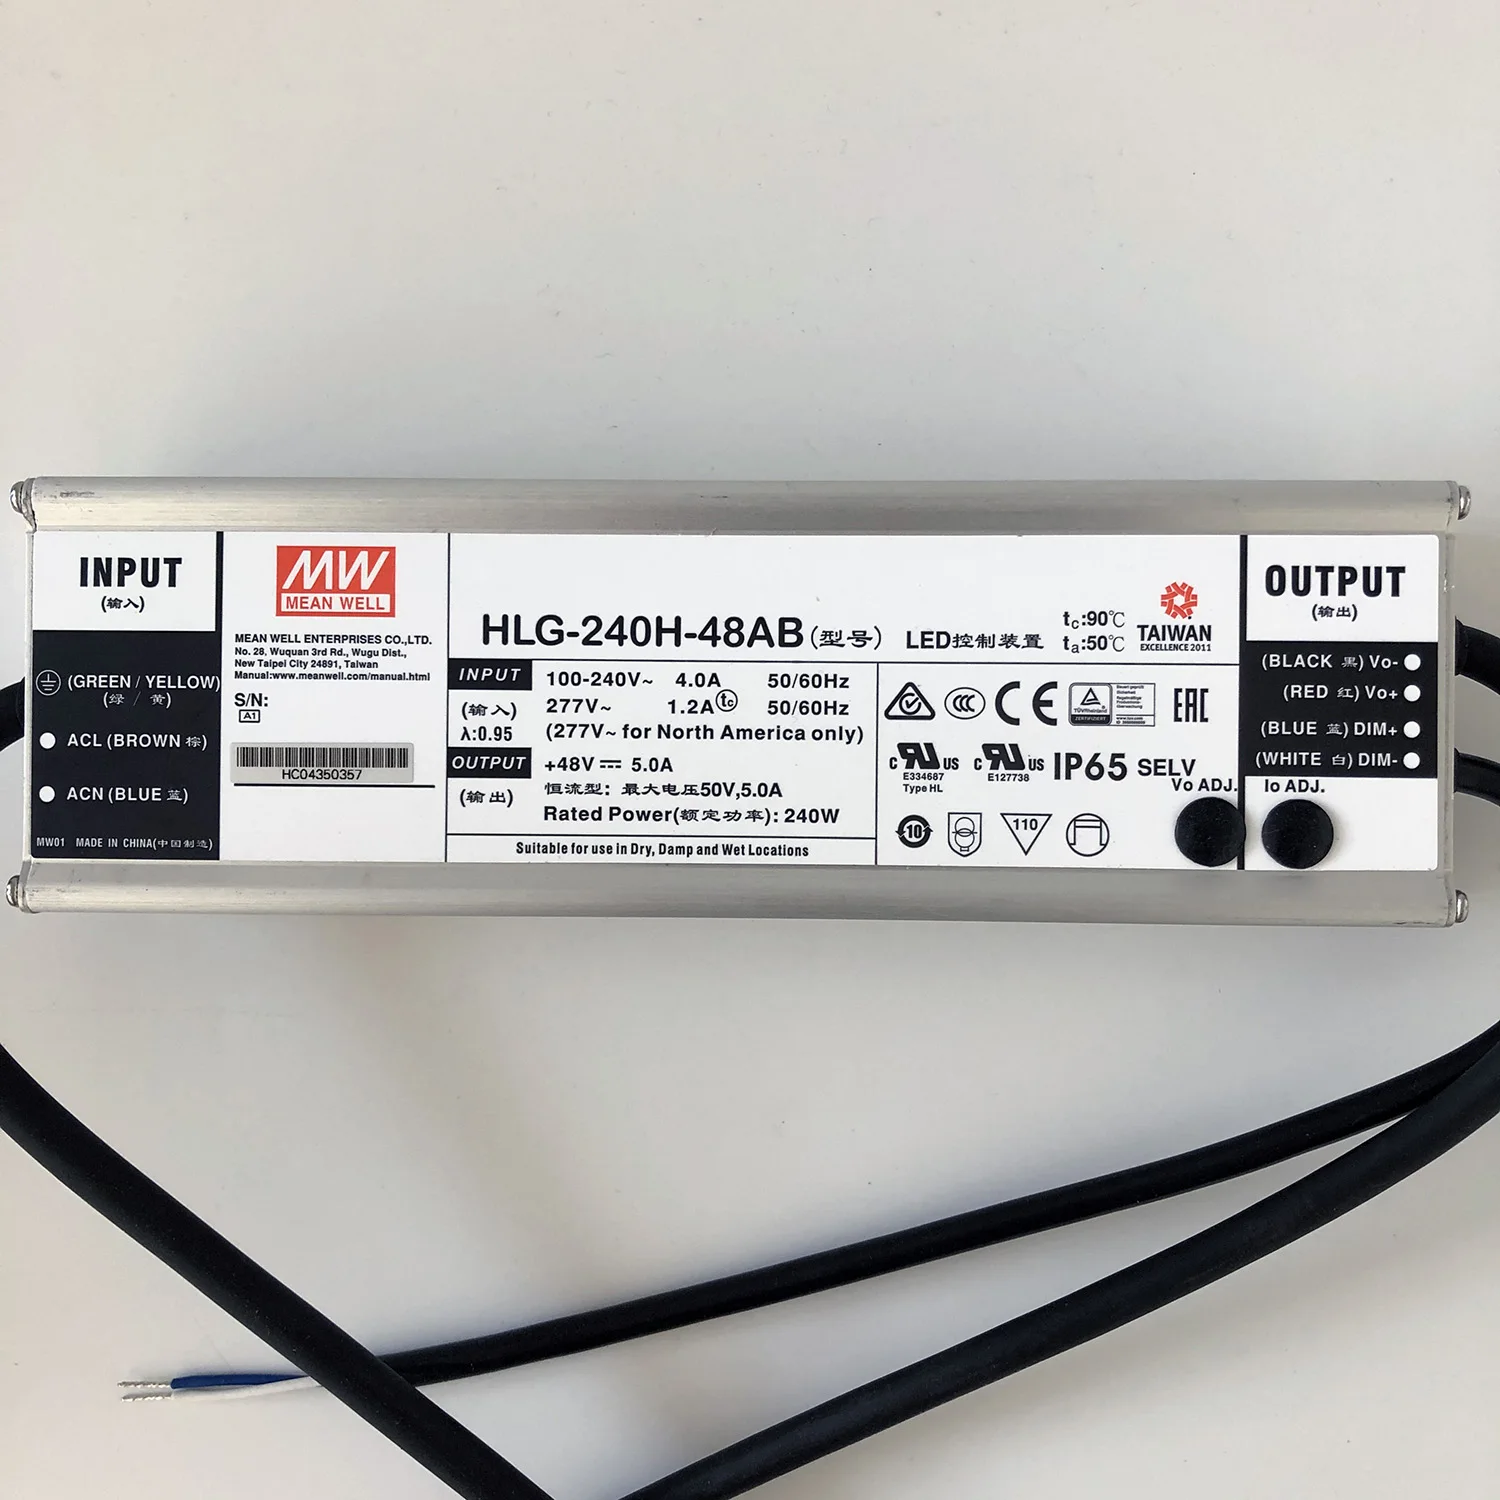 HLG-240H-48AB 240W Meanwell  AC-DC Single output LED Driver Mix Mode (CV+CC) with PFC; Output 48Vdc at 5A